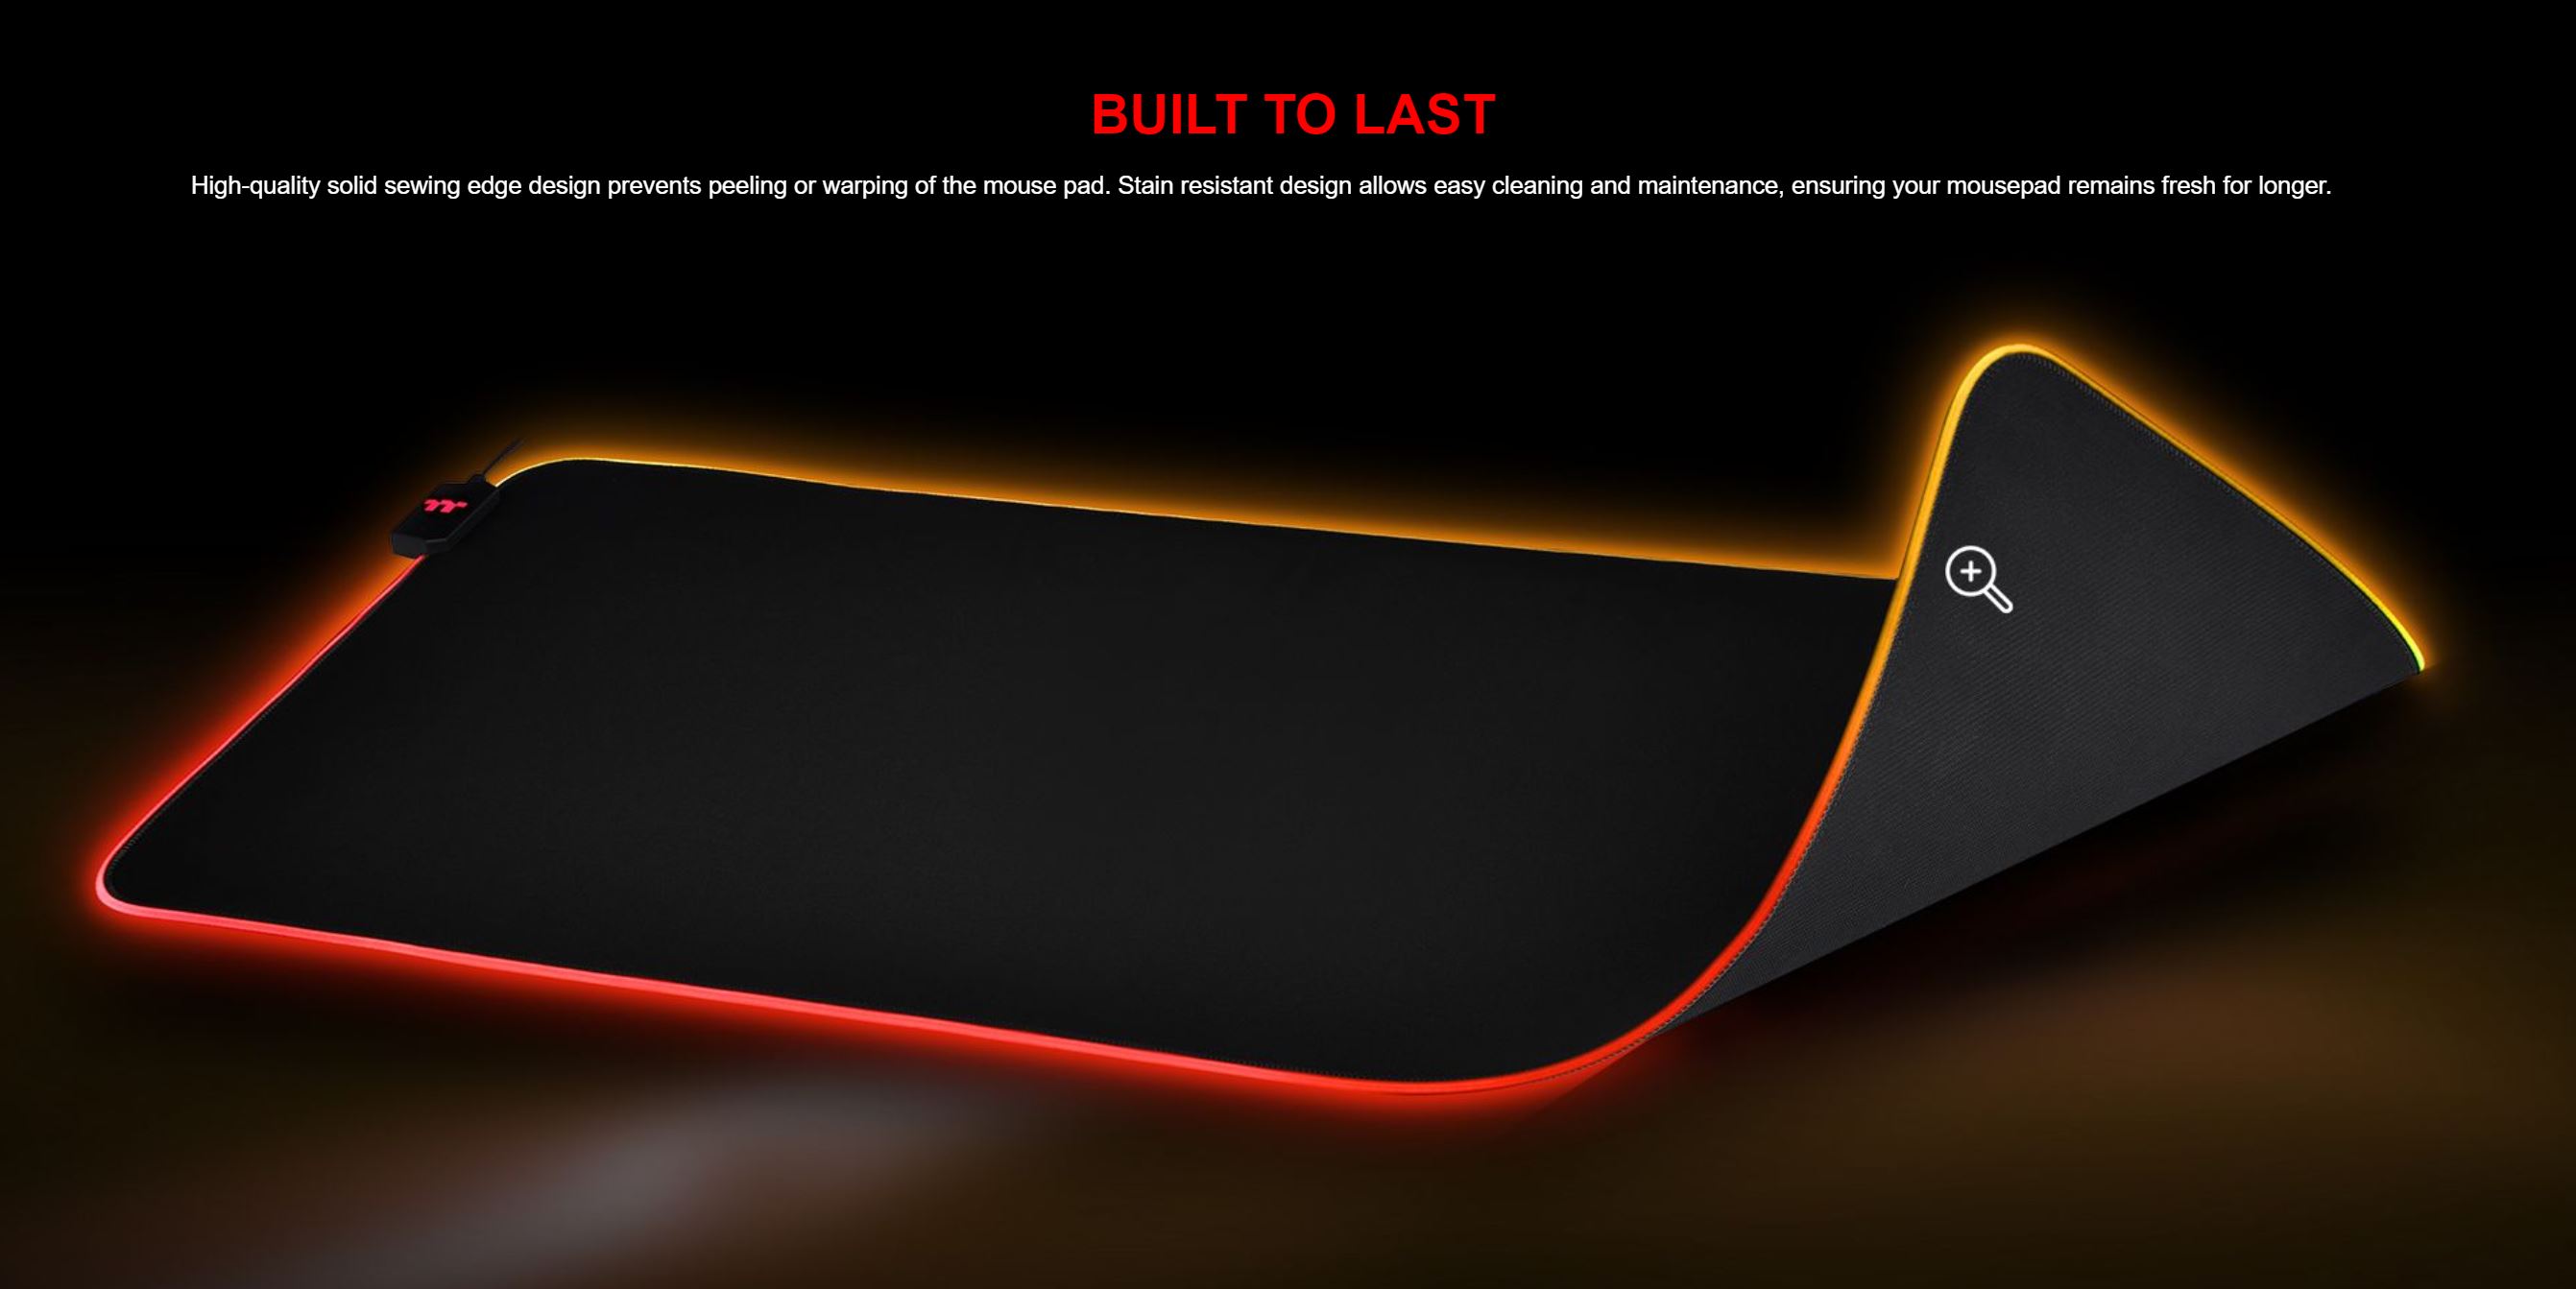 Thermaltake Level 20 RGB Extended Gaming Mouse Pad